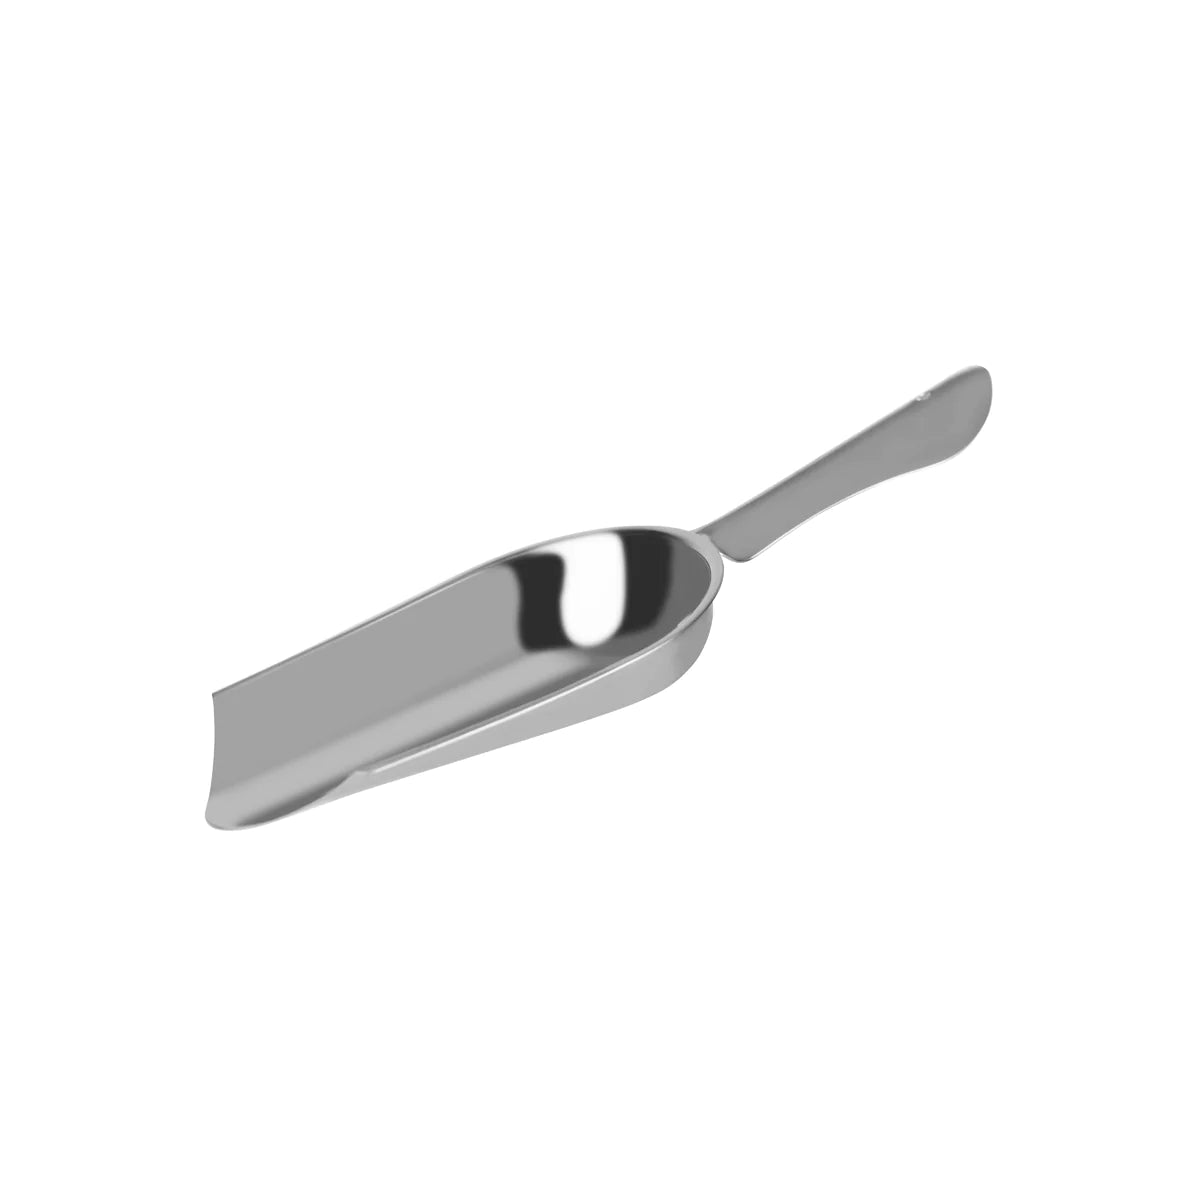 STAINLESS STEEL ICE SCOOP